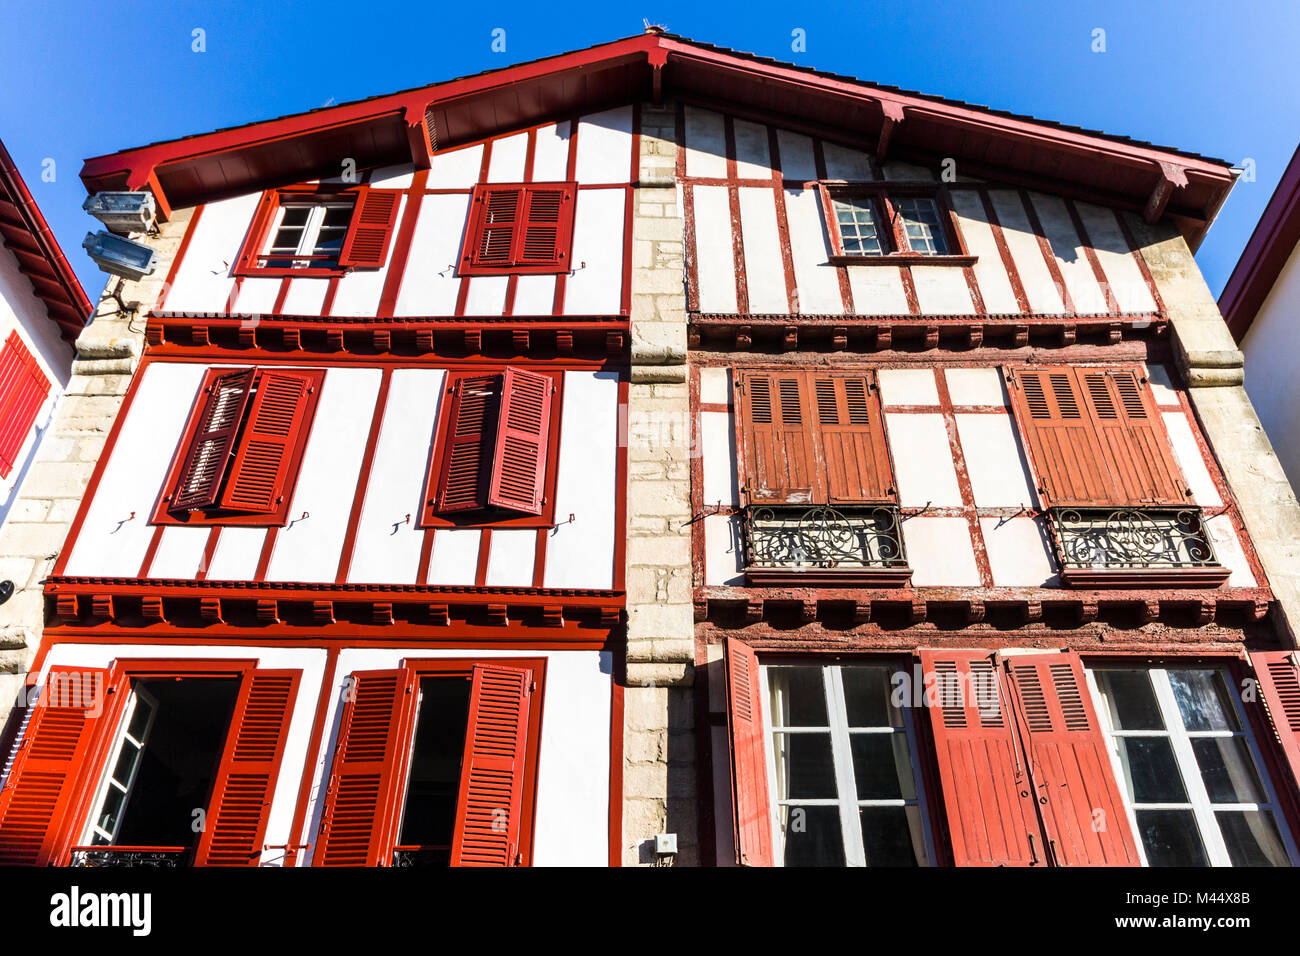 Traditional red and white half-timbered house in Saint-Jean-de-Luz, French Basque Country, Aquitaine, France Stock Photo